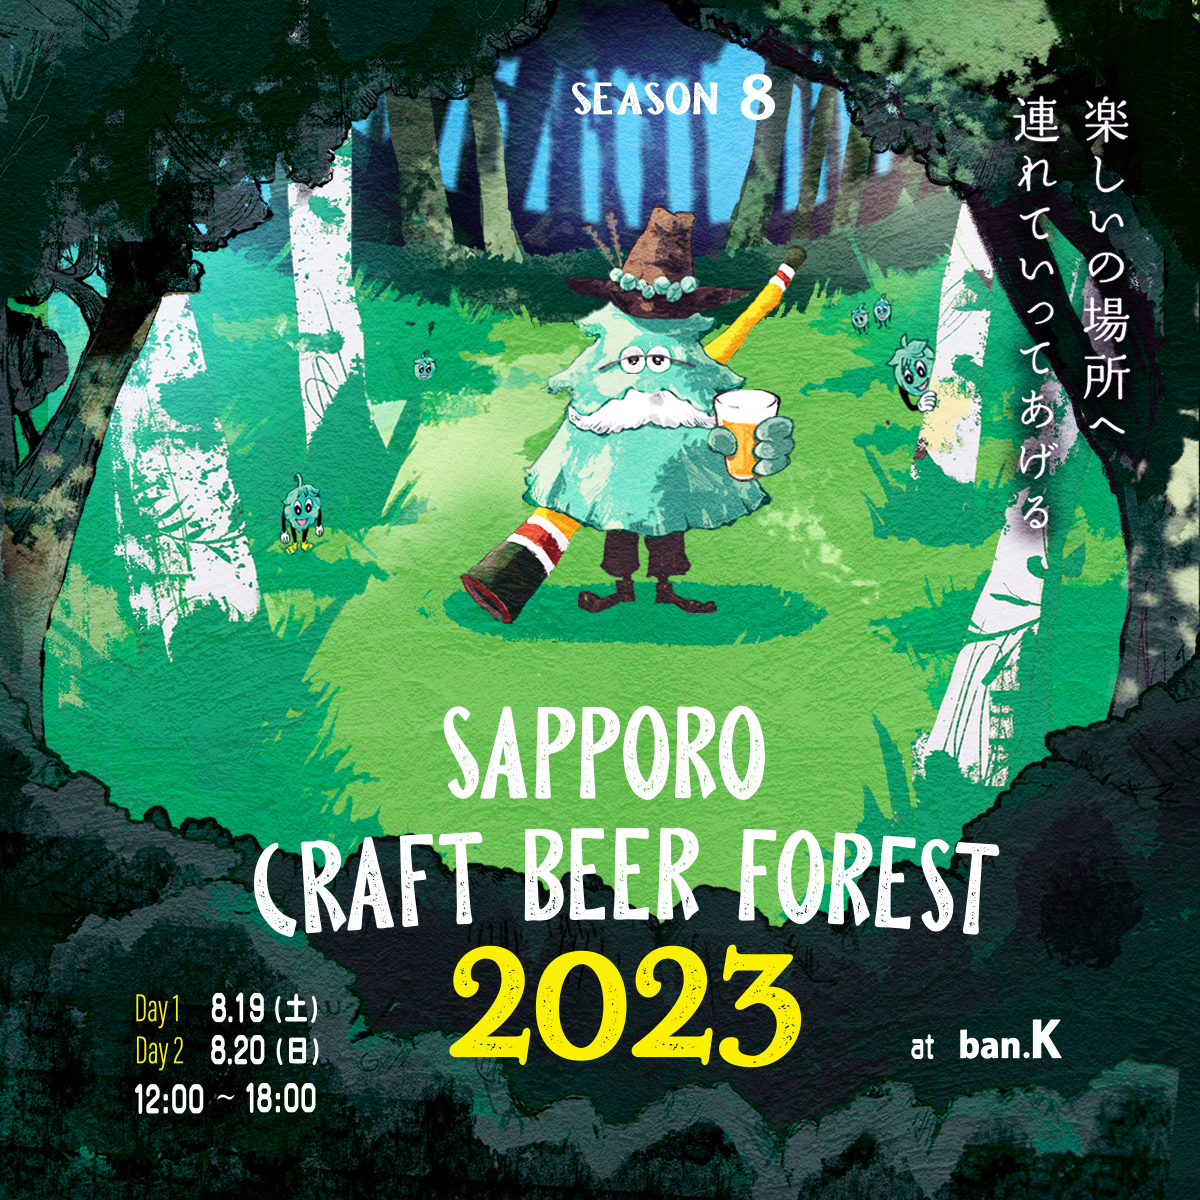 Sapporo Craft Beer Forest 2023